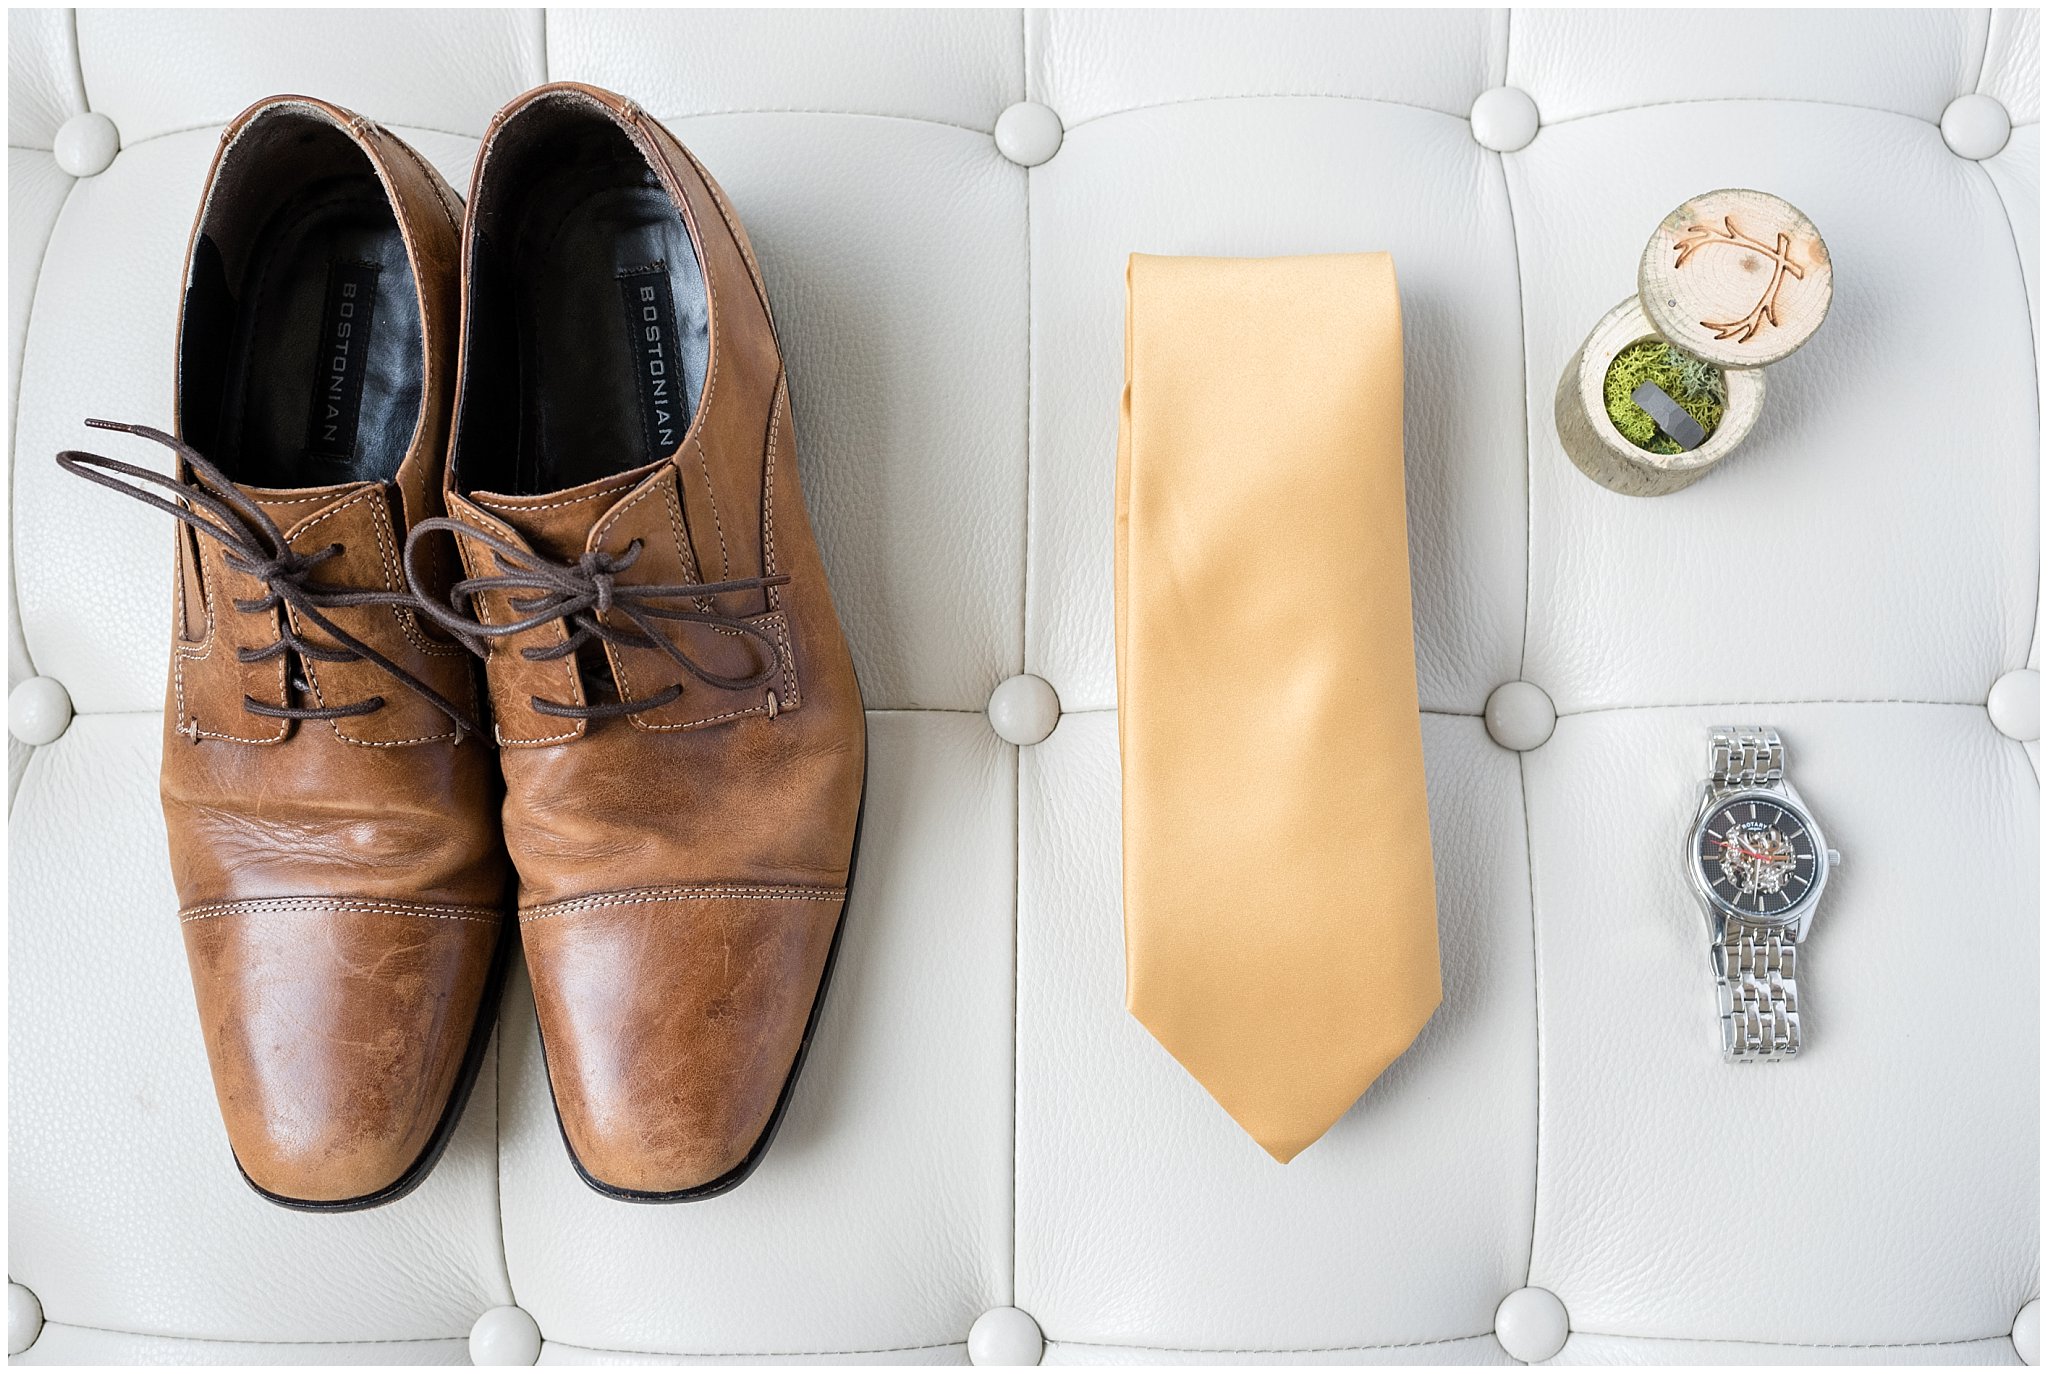 Groom's details | Shoes, tie, ring, watch | Talia Event Center